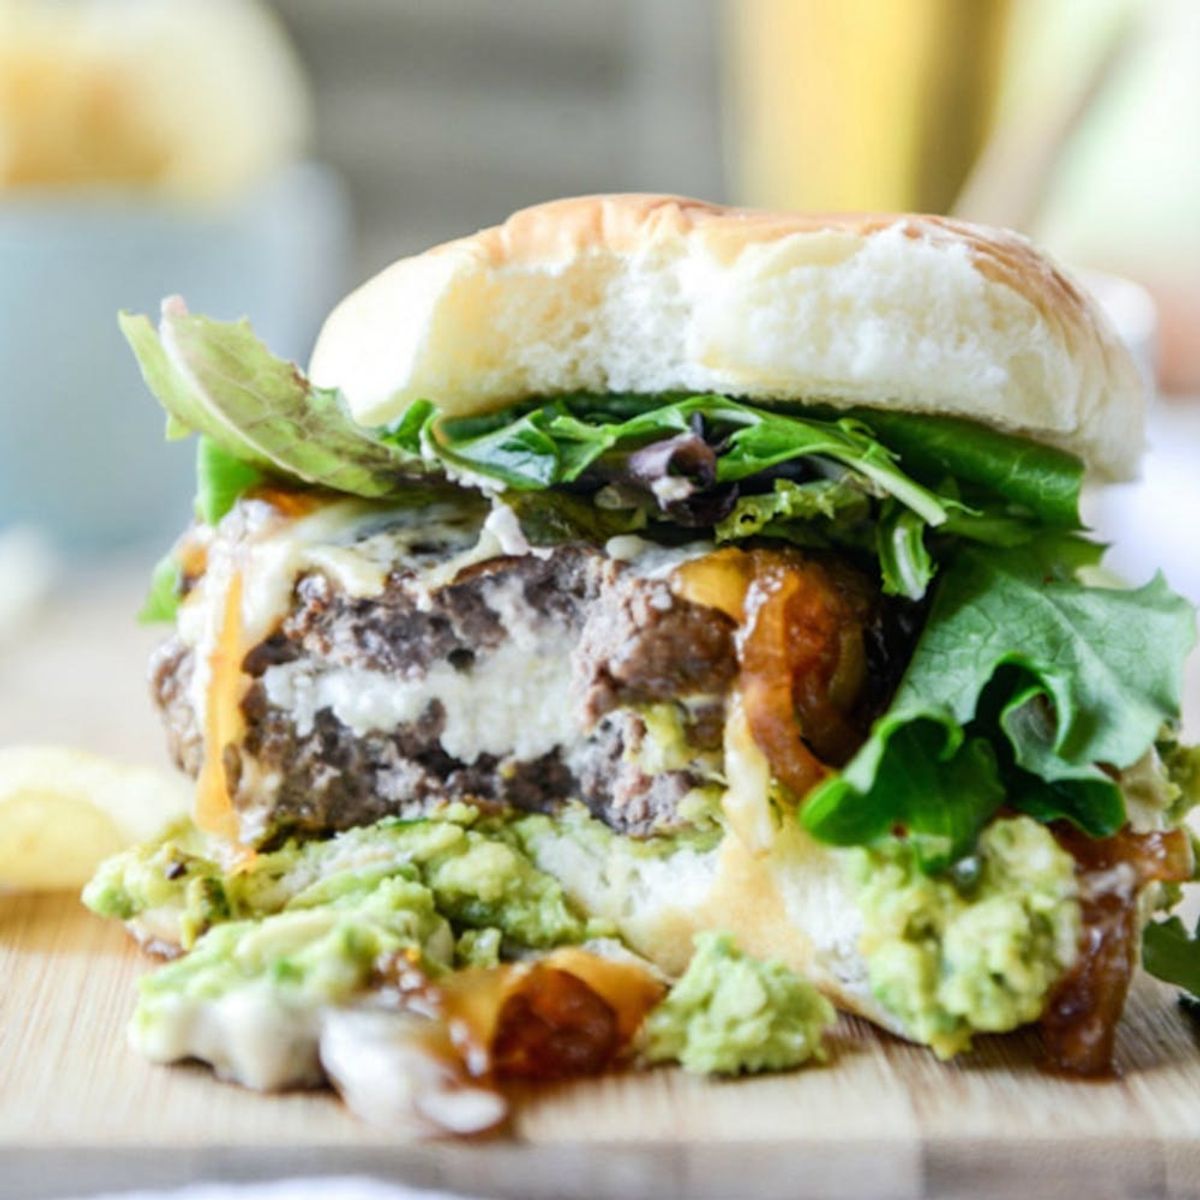 14 Juicy Lucy Stuffed Burger Hacks for Your Memorial Day BBQ